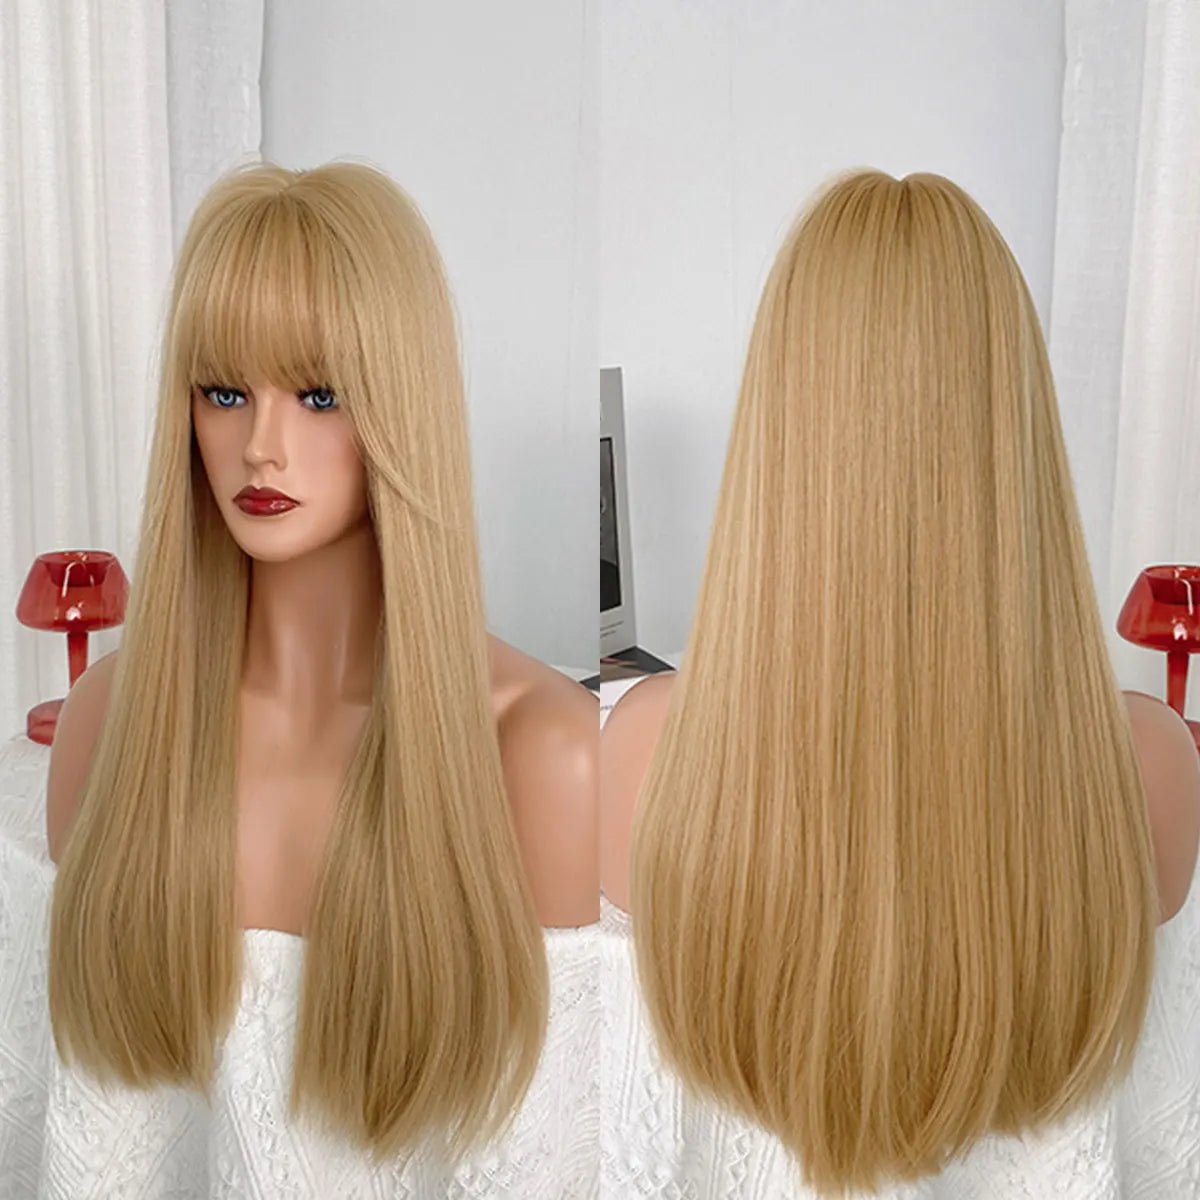 Chic Couture: Deluxe Blonde Wig - HairNjoy